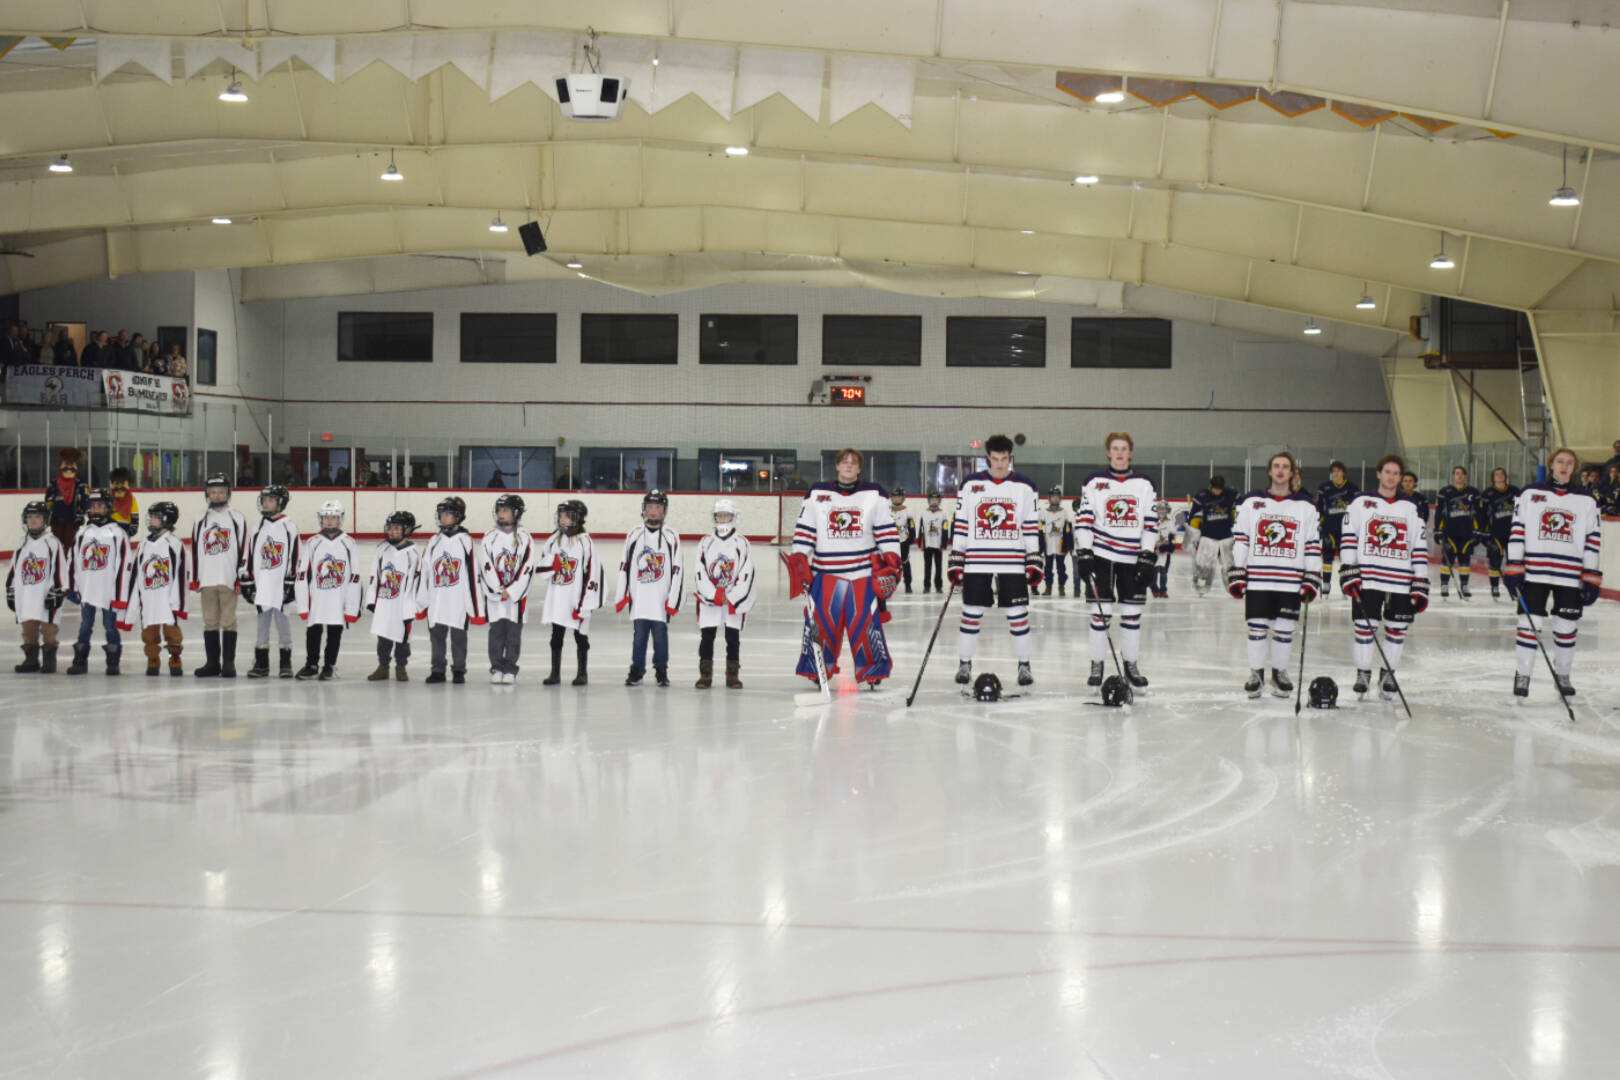 The Sicamous Eagles played the 100 Mile House Wranglers on Friday, Jan. 20 and had an ineligible player on the ice. The Eagles’ forfeited the game and head coach Nick Deschenes was given a one-game suspension for the error. (Rebecca Willson- Eagle Valley News)